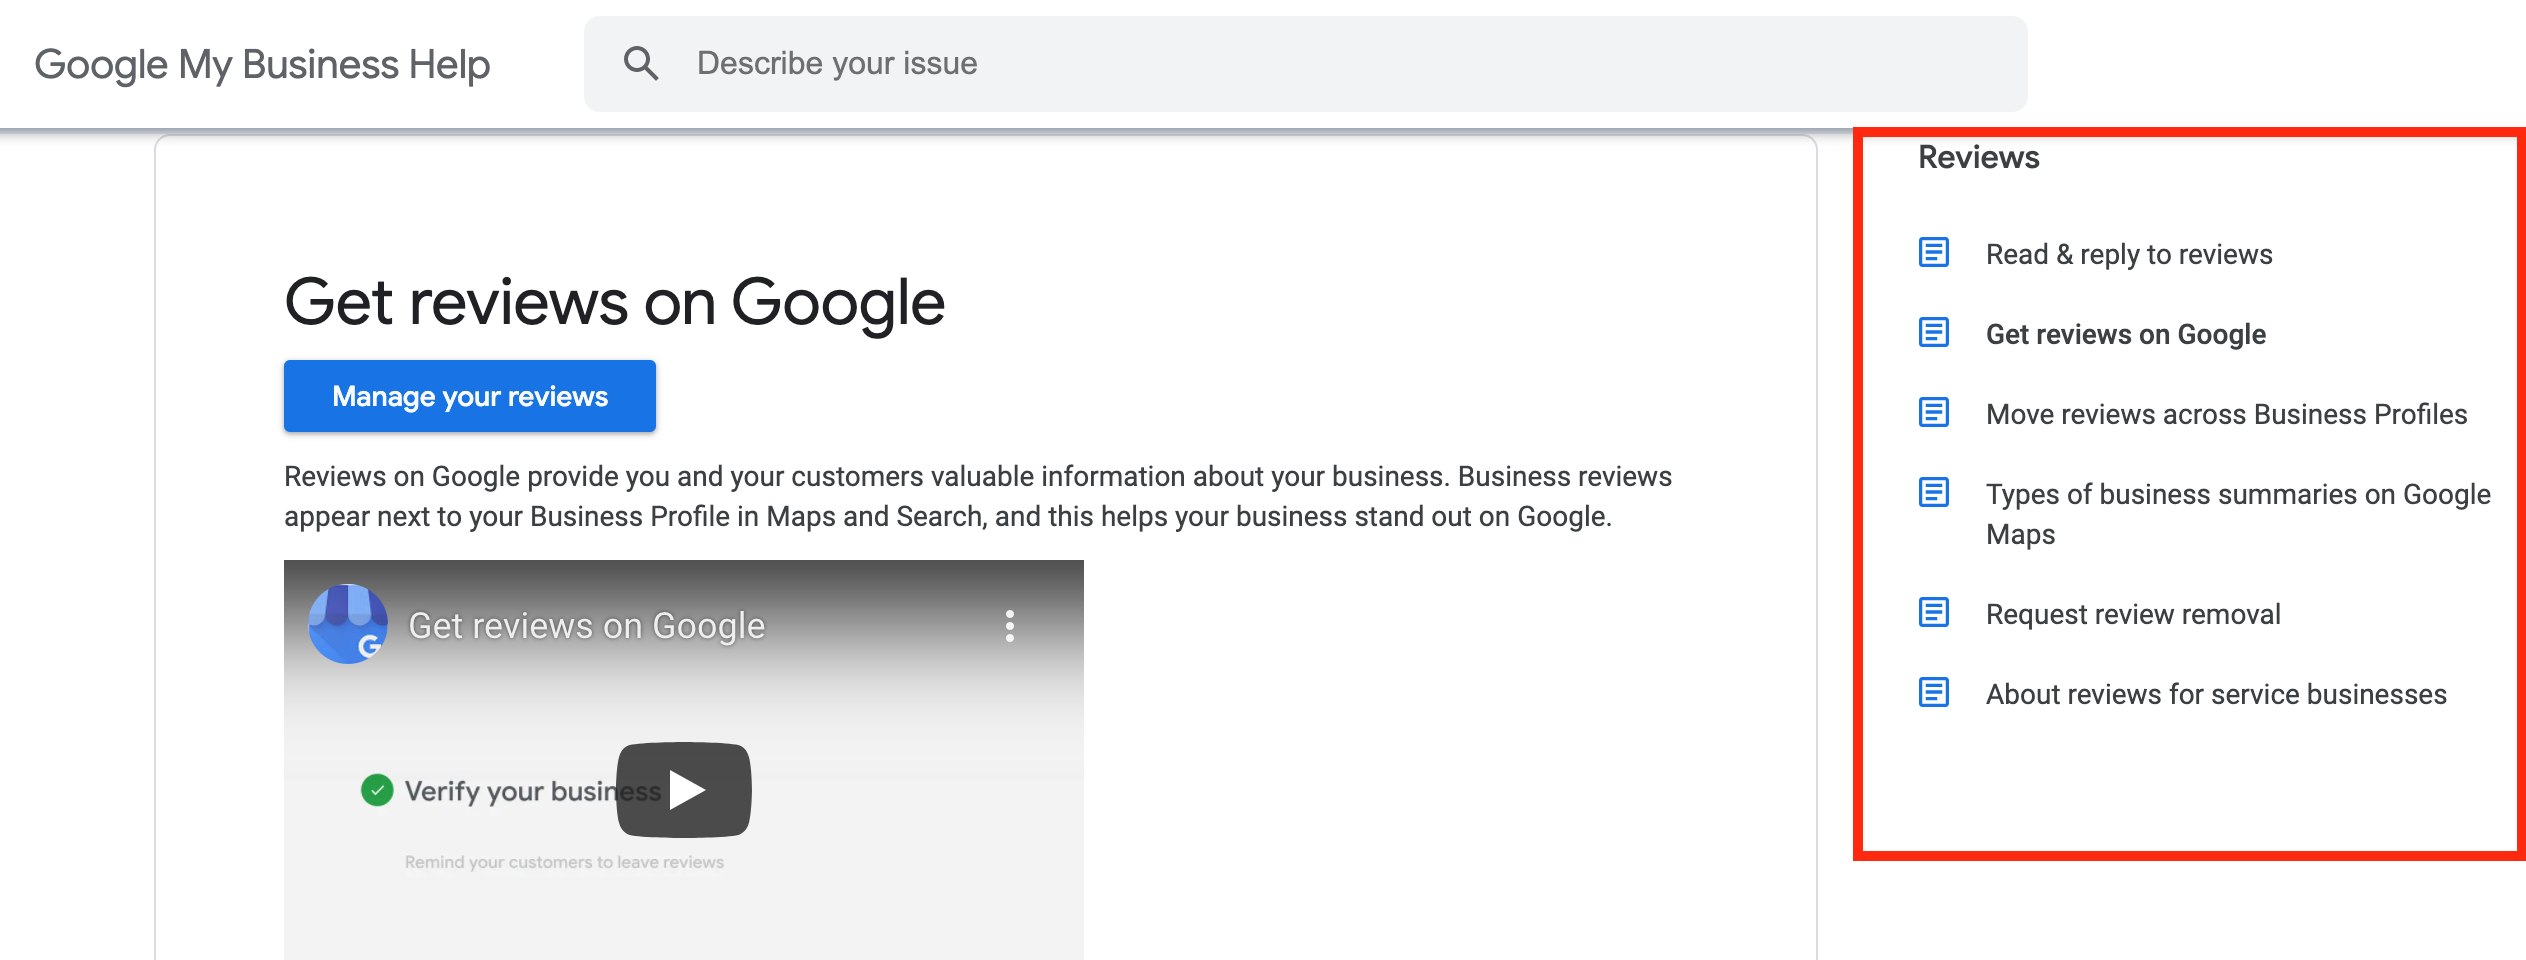 Page on how to manage reviews on Google.